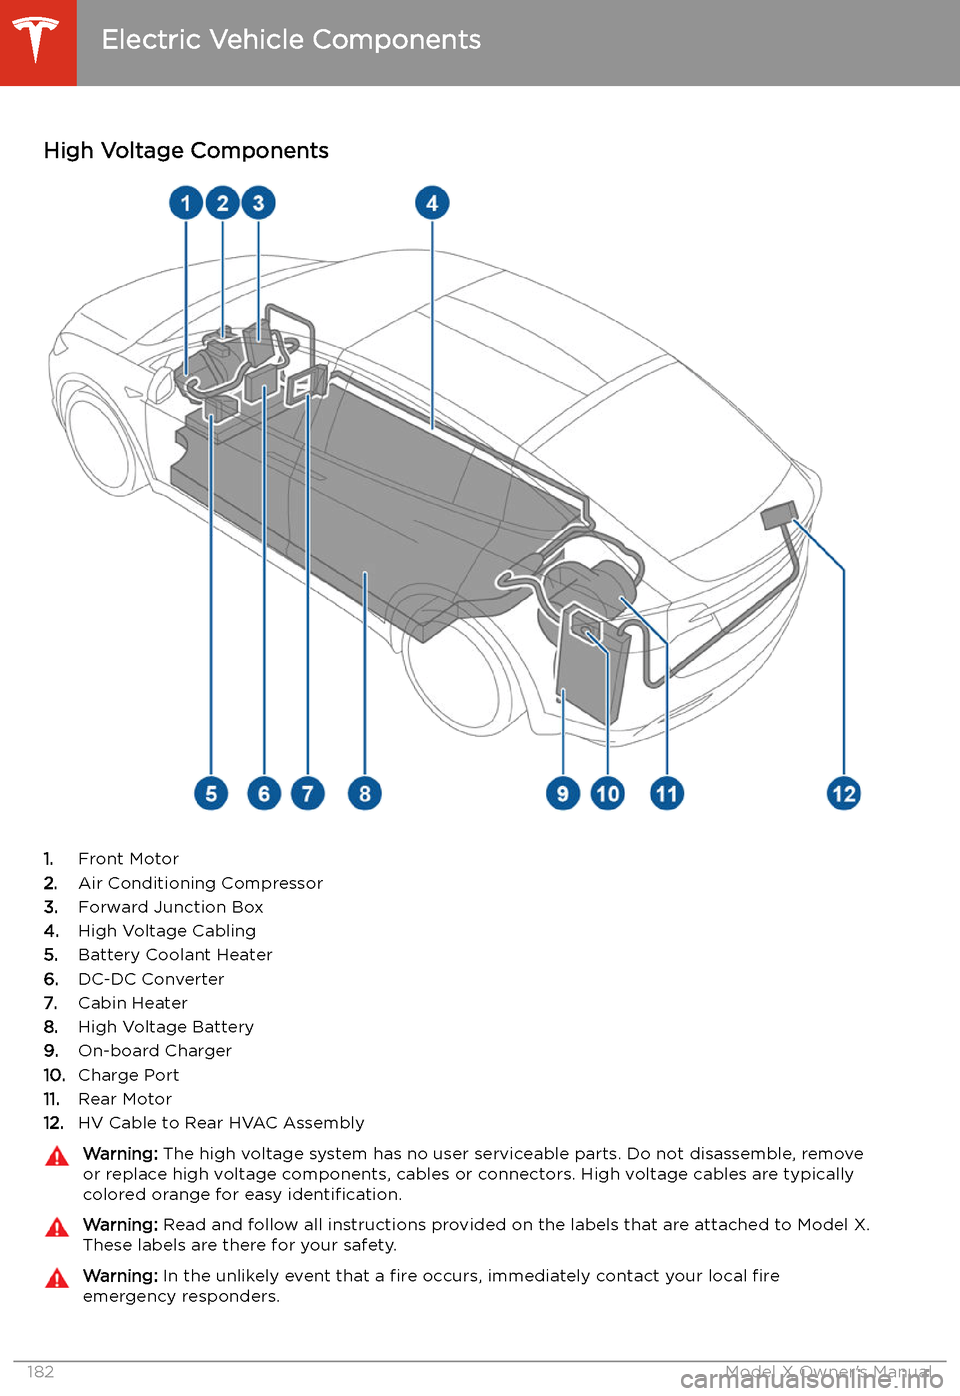 TESLA MODEL X 2020  Owners Manual Charging
Electric Vehicle Components
High Voltage Components
1. Front Motor
2. Air Conditioning Compressor
3. Forward Junction Box
4. High Voltage Cabling
5. Battery Coolant Heater
6. DC-DC Converter
